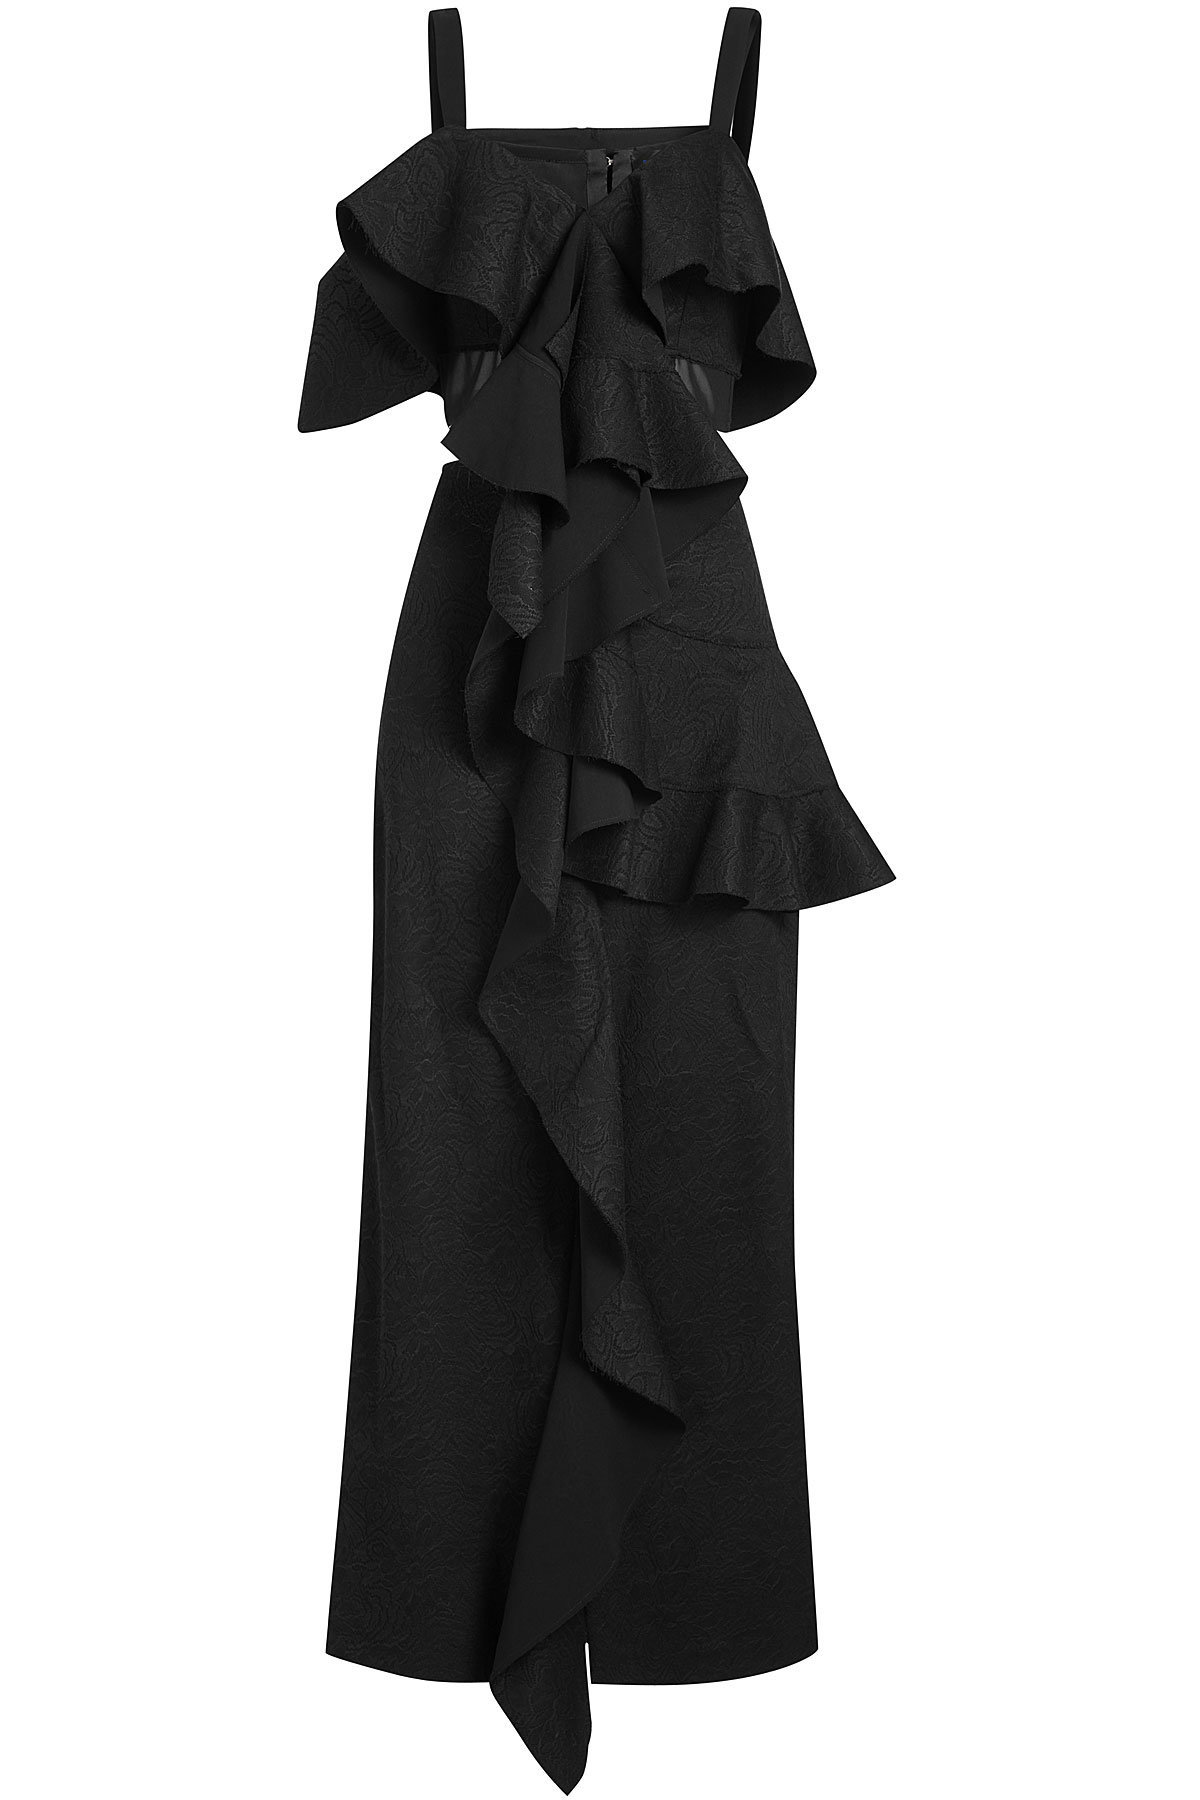 Proenza Schouler - Ruffle Dress with Cut-Out Middle